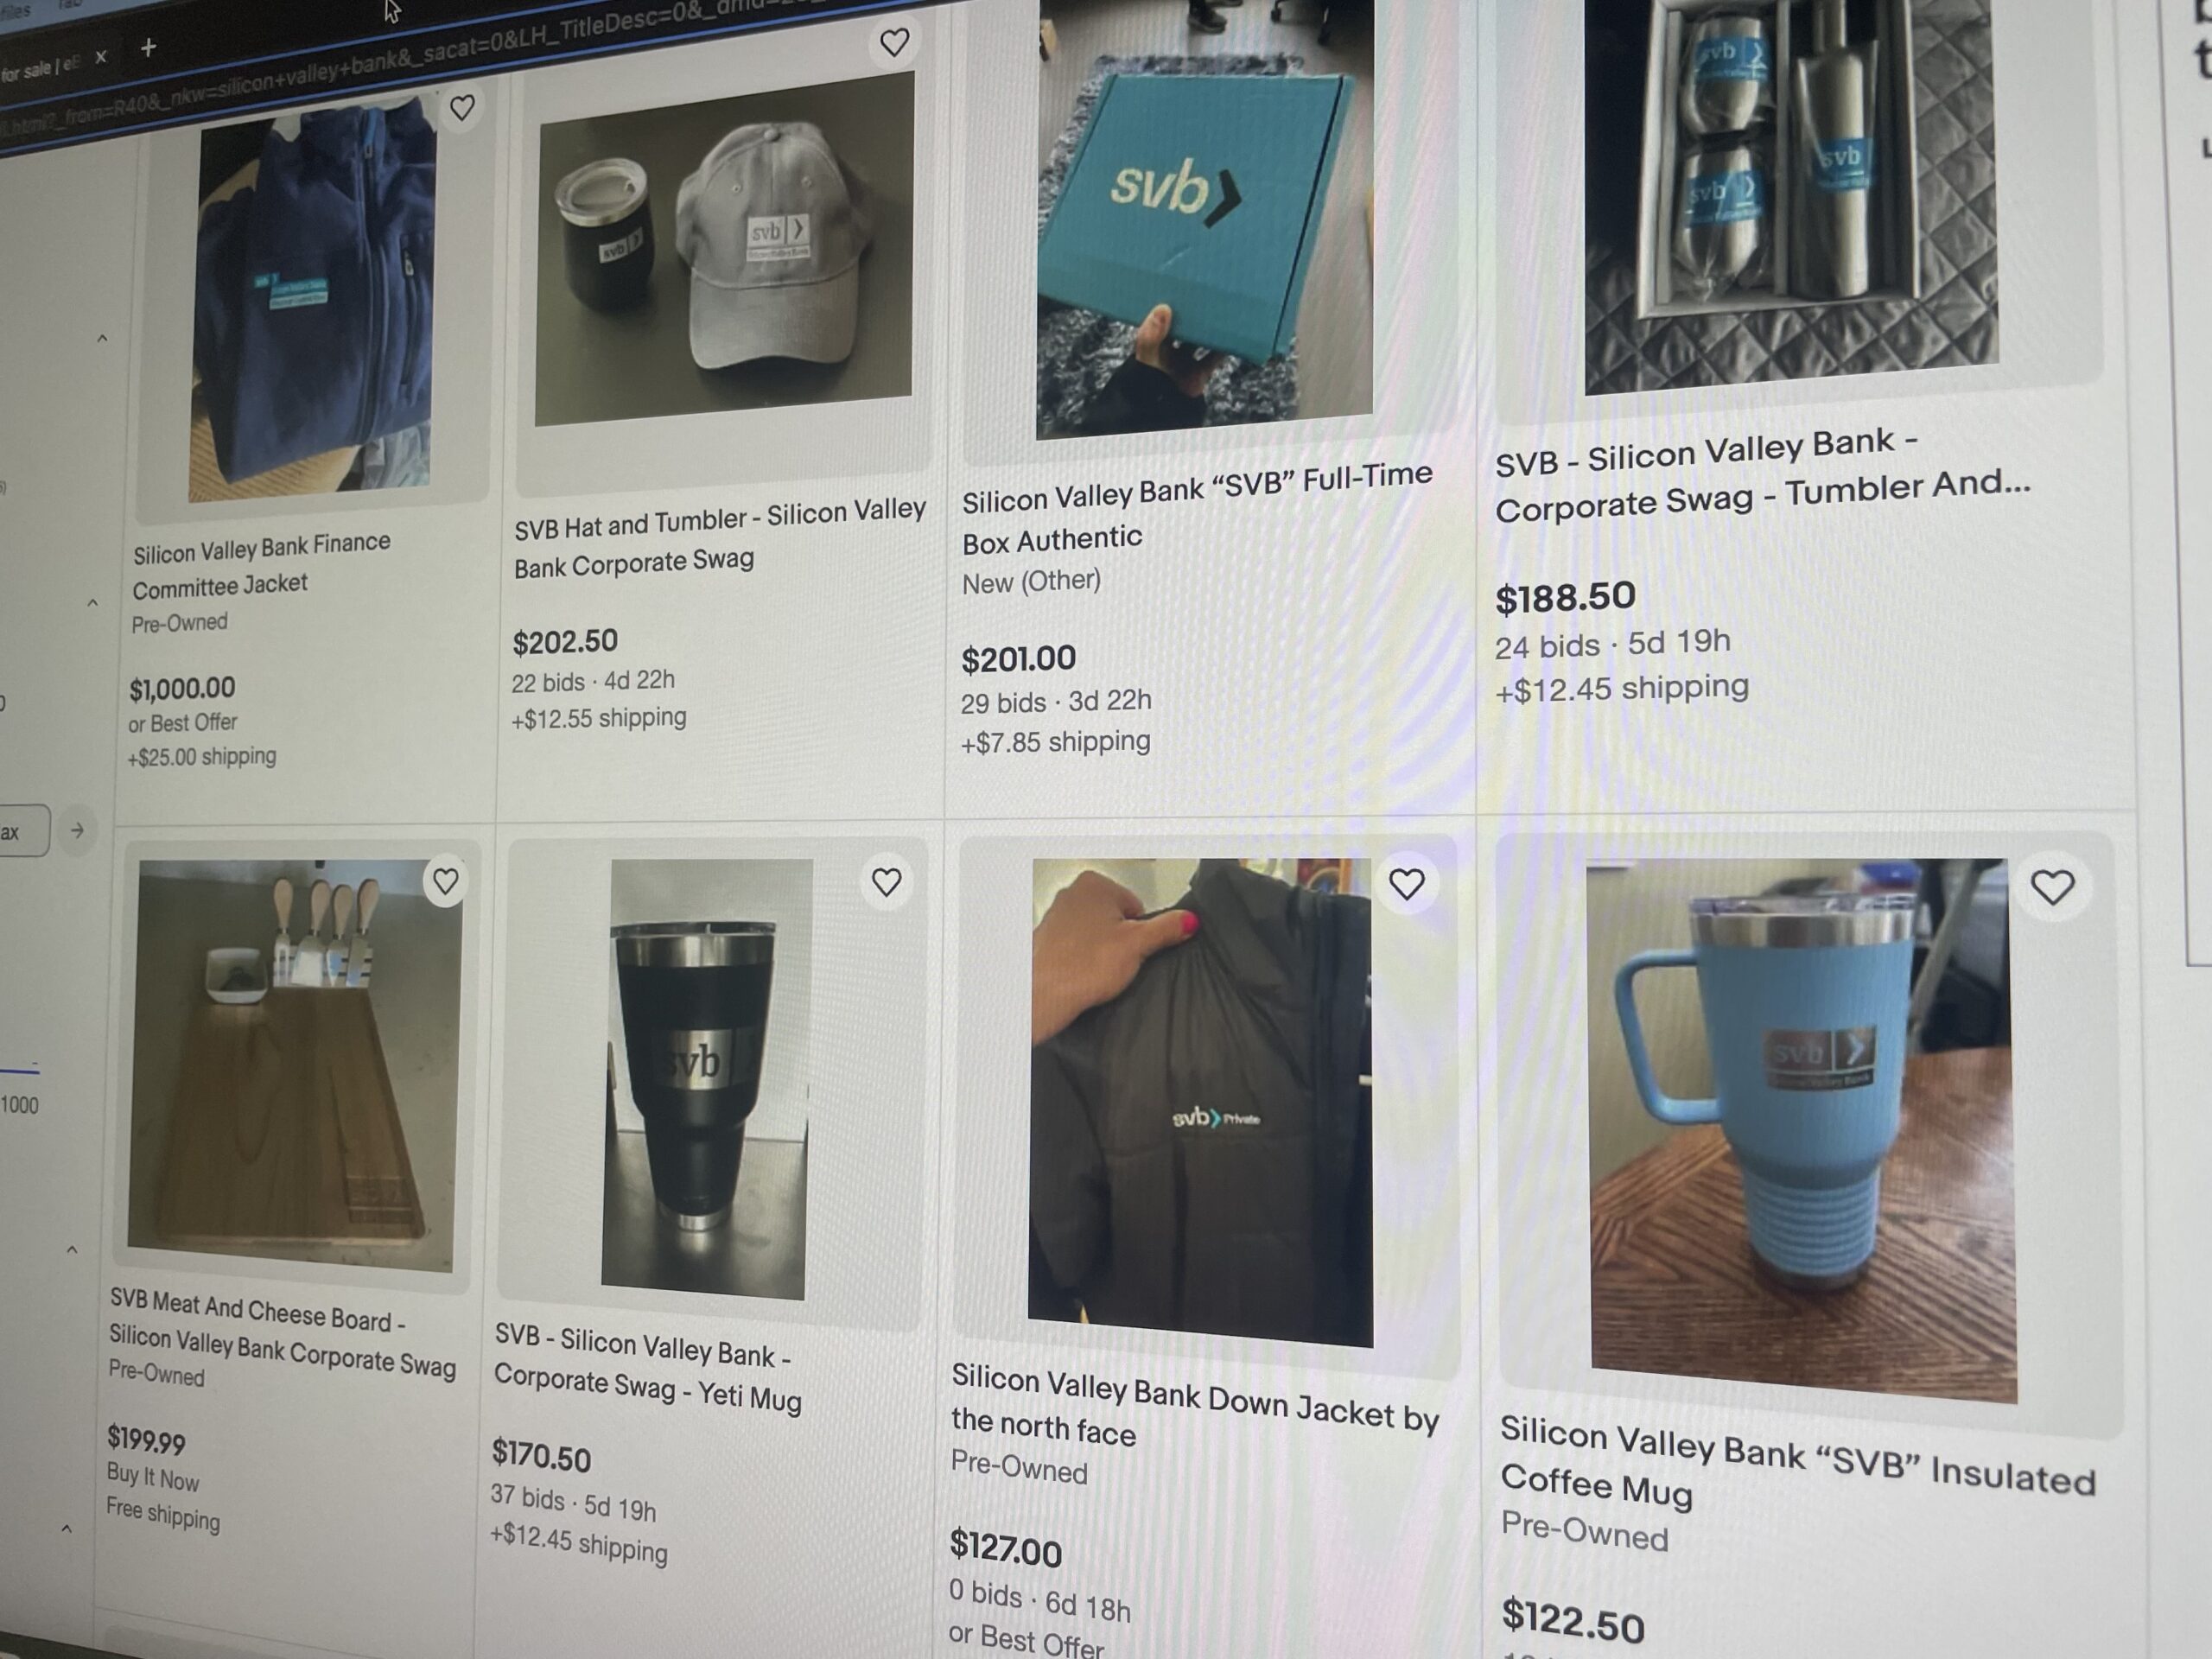 Want a Slice of the Silicon Valley Bank Swag? eBay Has You Covered